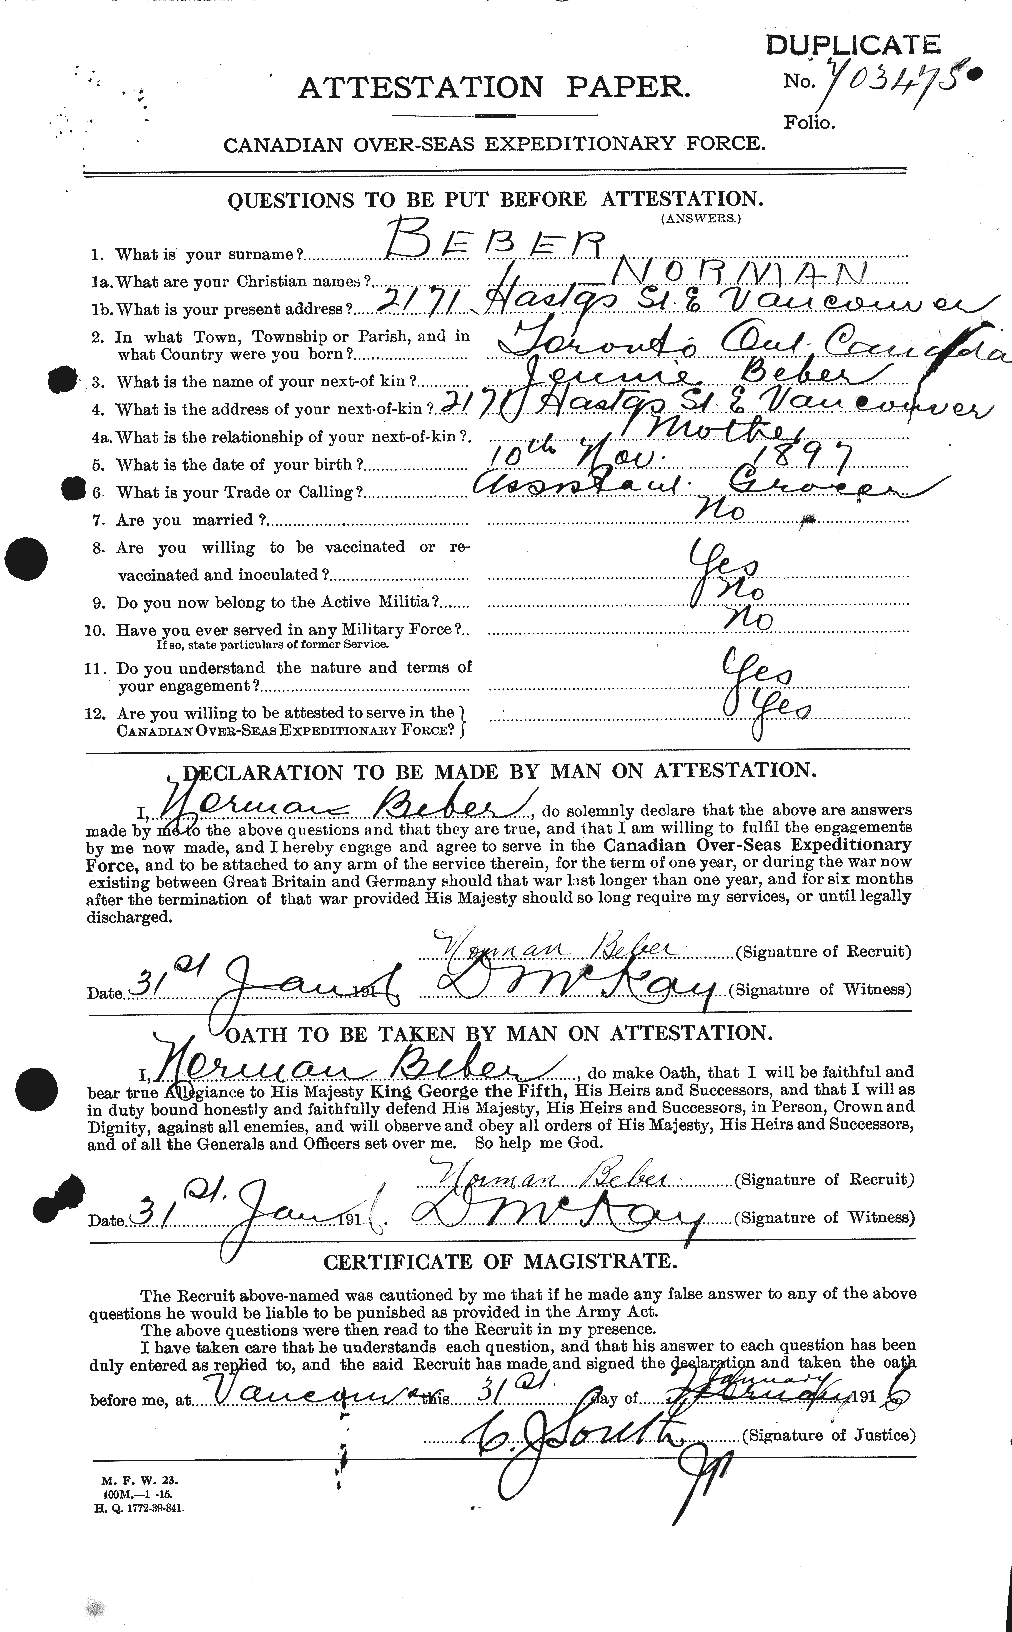 Personnel Records of the First World War - CEF 232007a